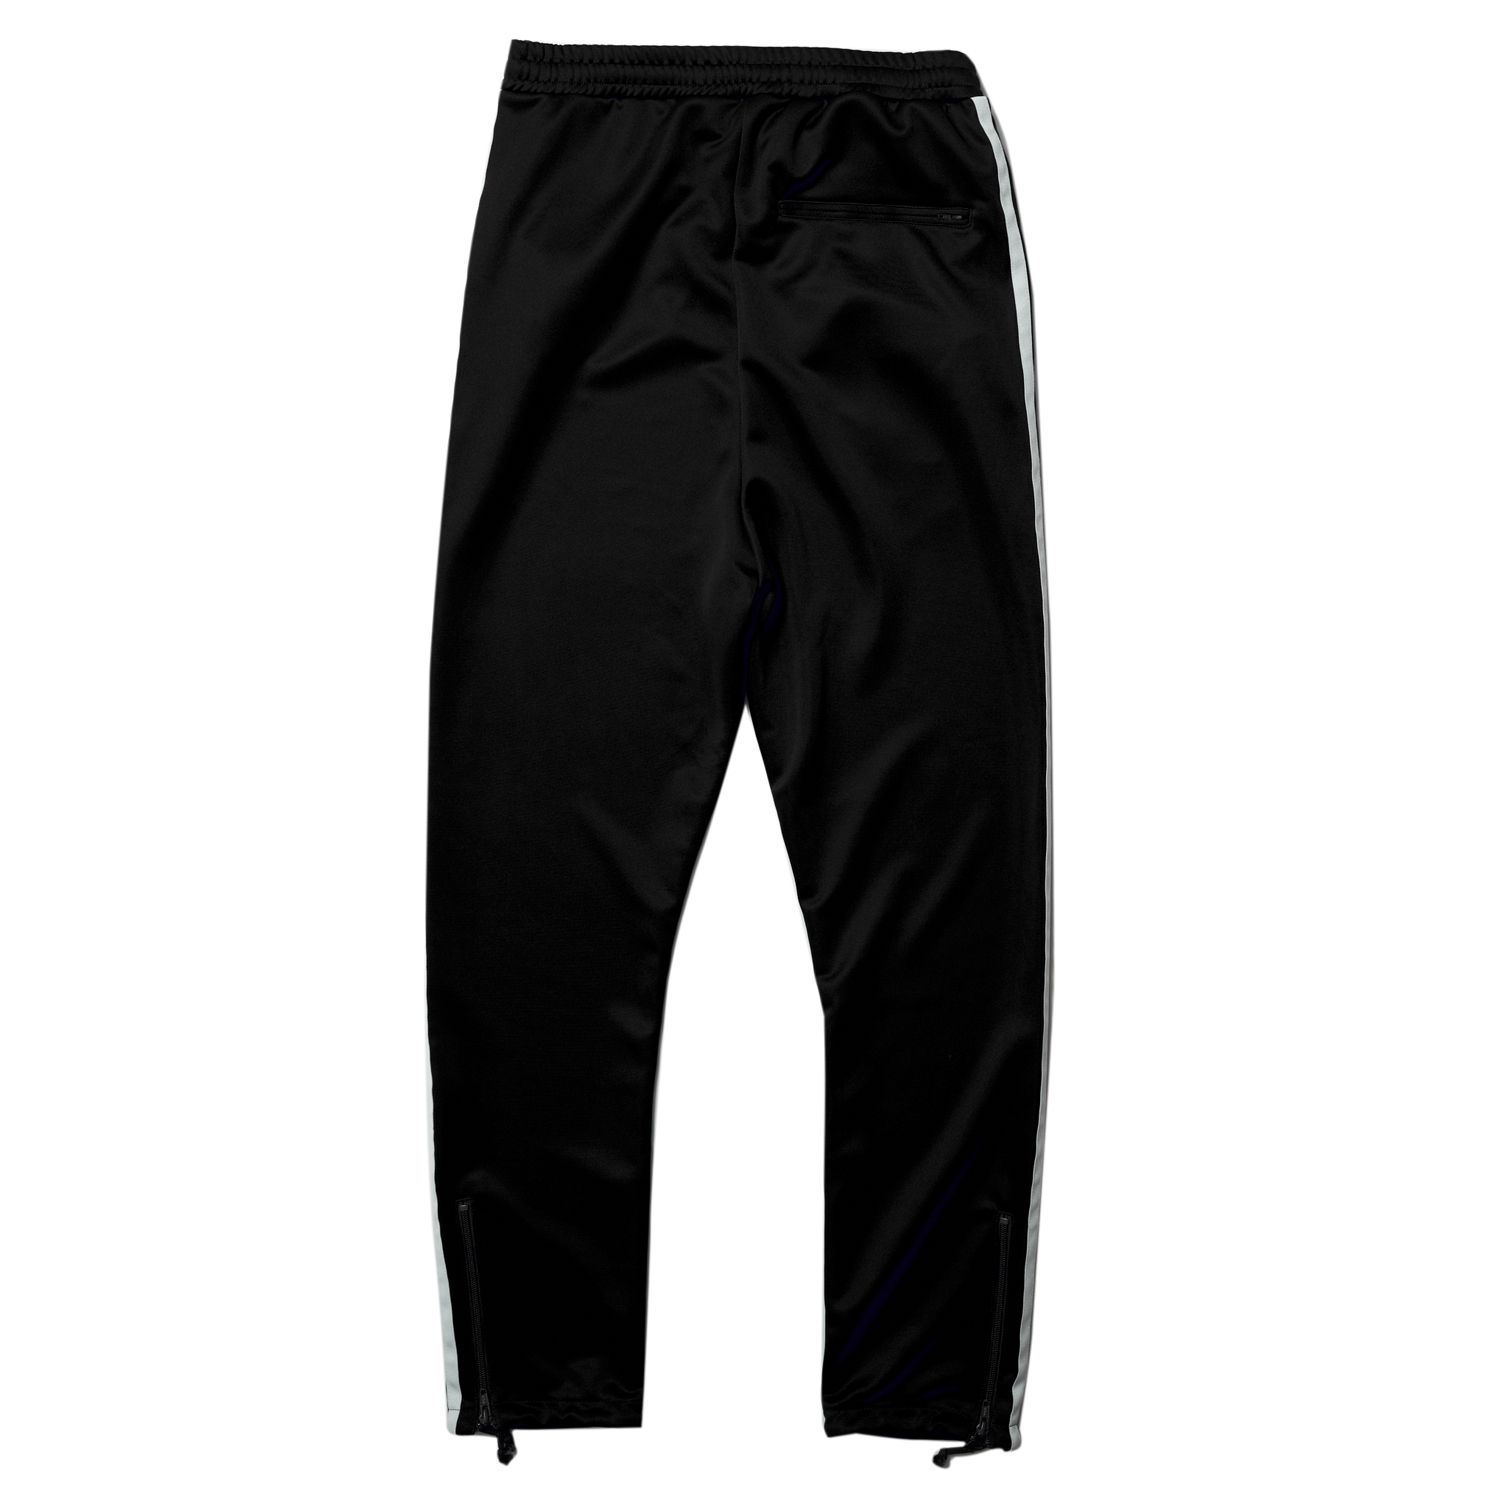 SALE／79%OFF】 doublet 23SS invisible track pants M黒古着